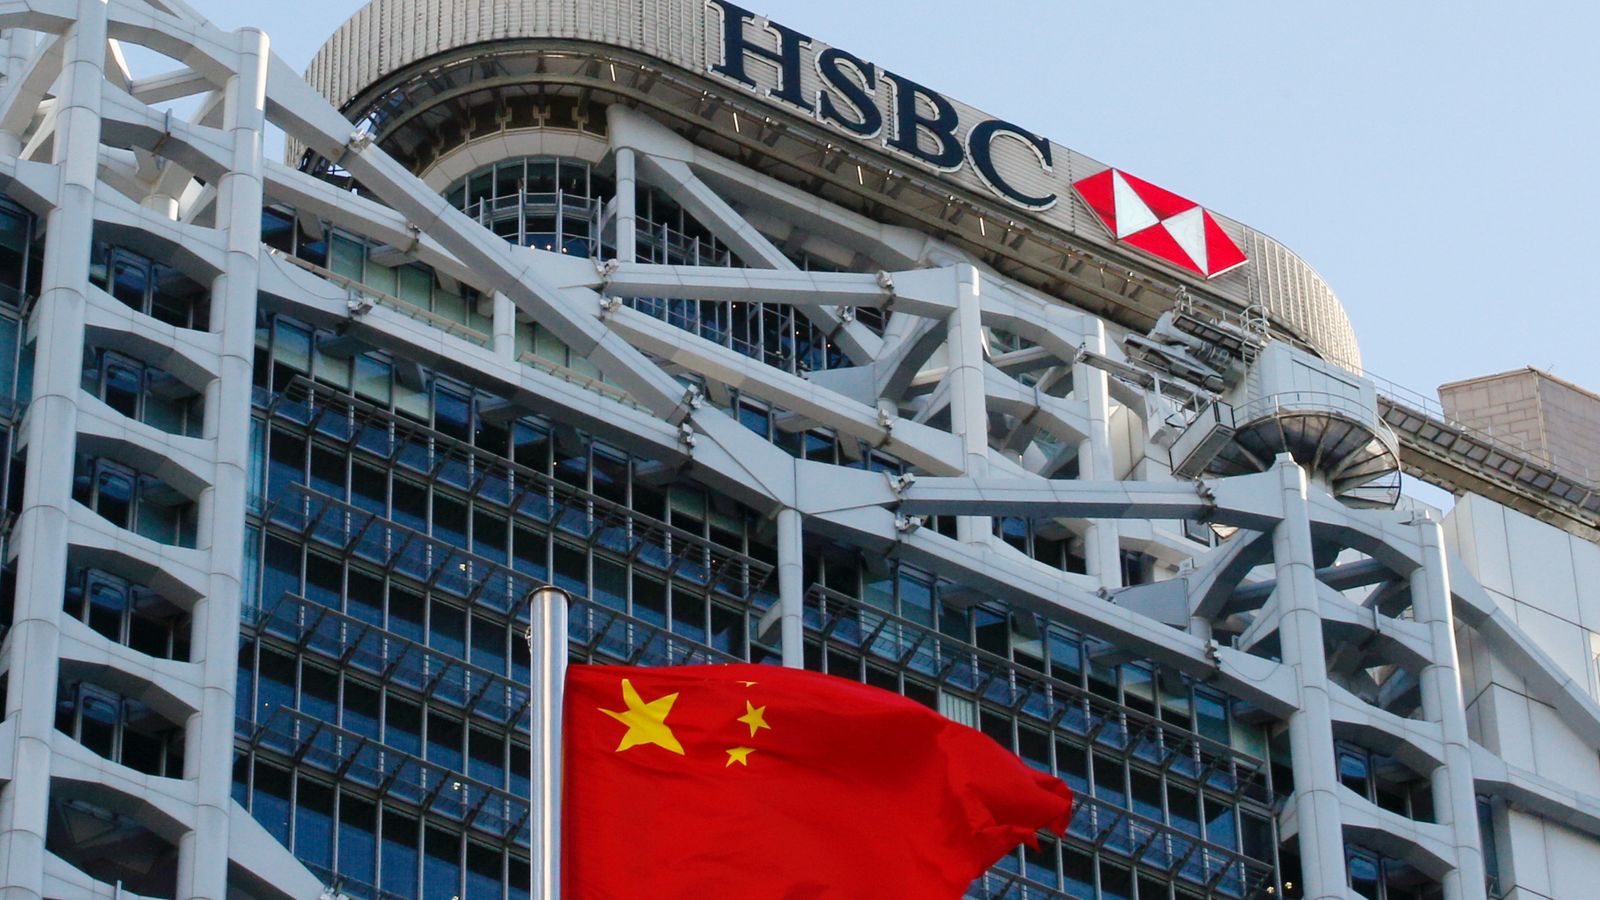 hsbc shares plunge as record annual profits are dented by china woes